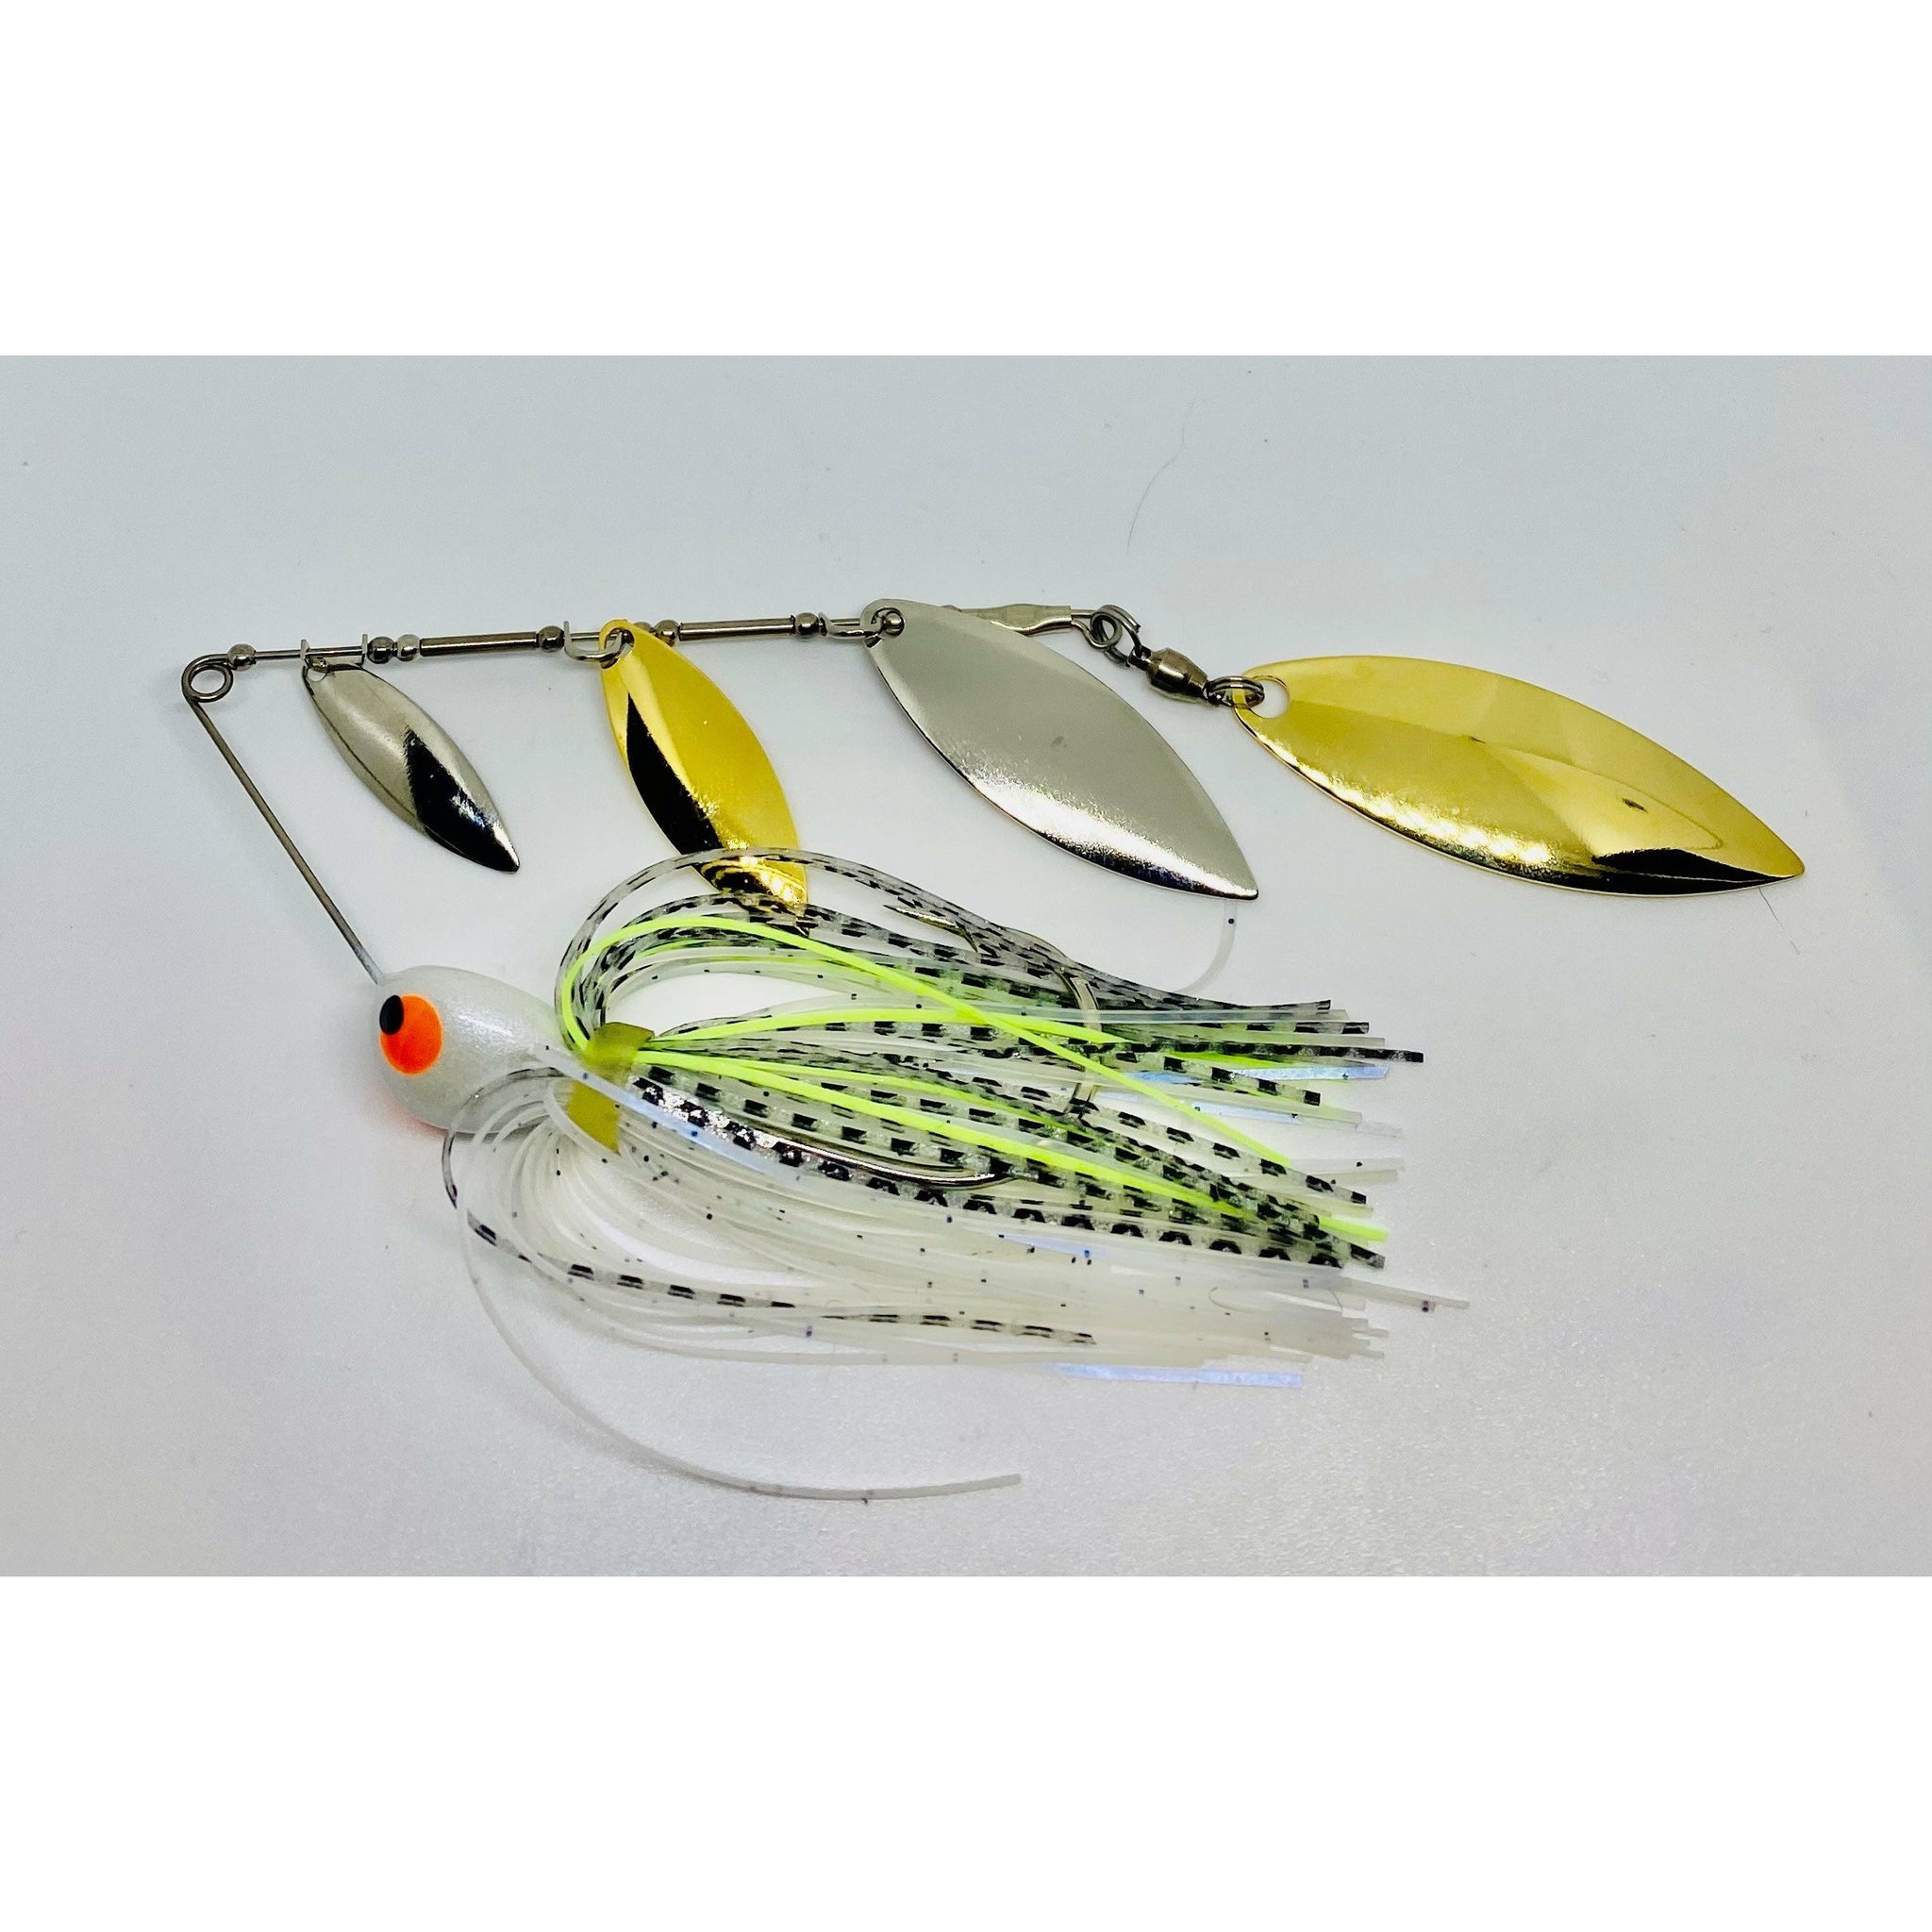 3 count Lot Brand new Wahoo 1/4 ounce Spinnerbaits - Chartreuse